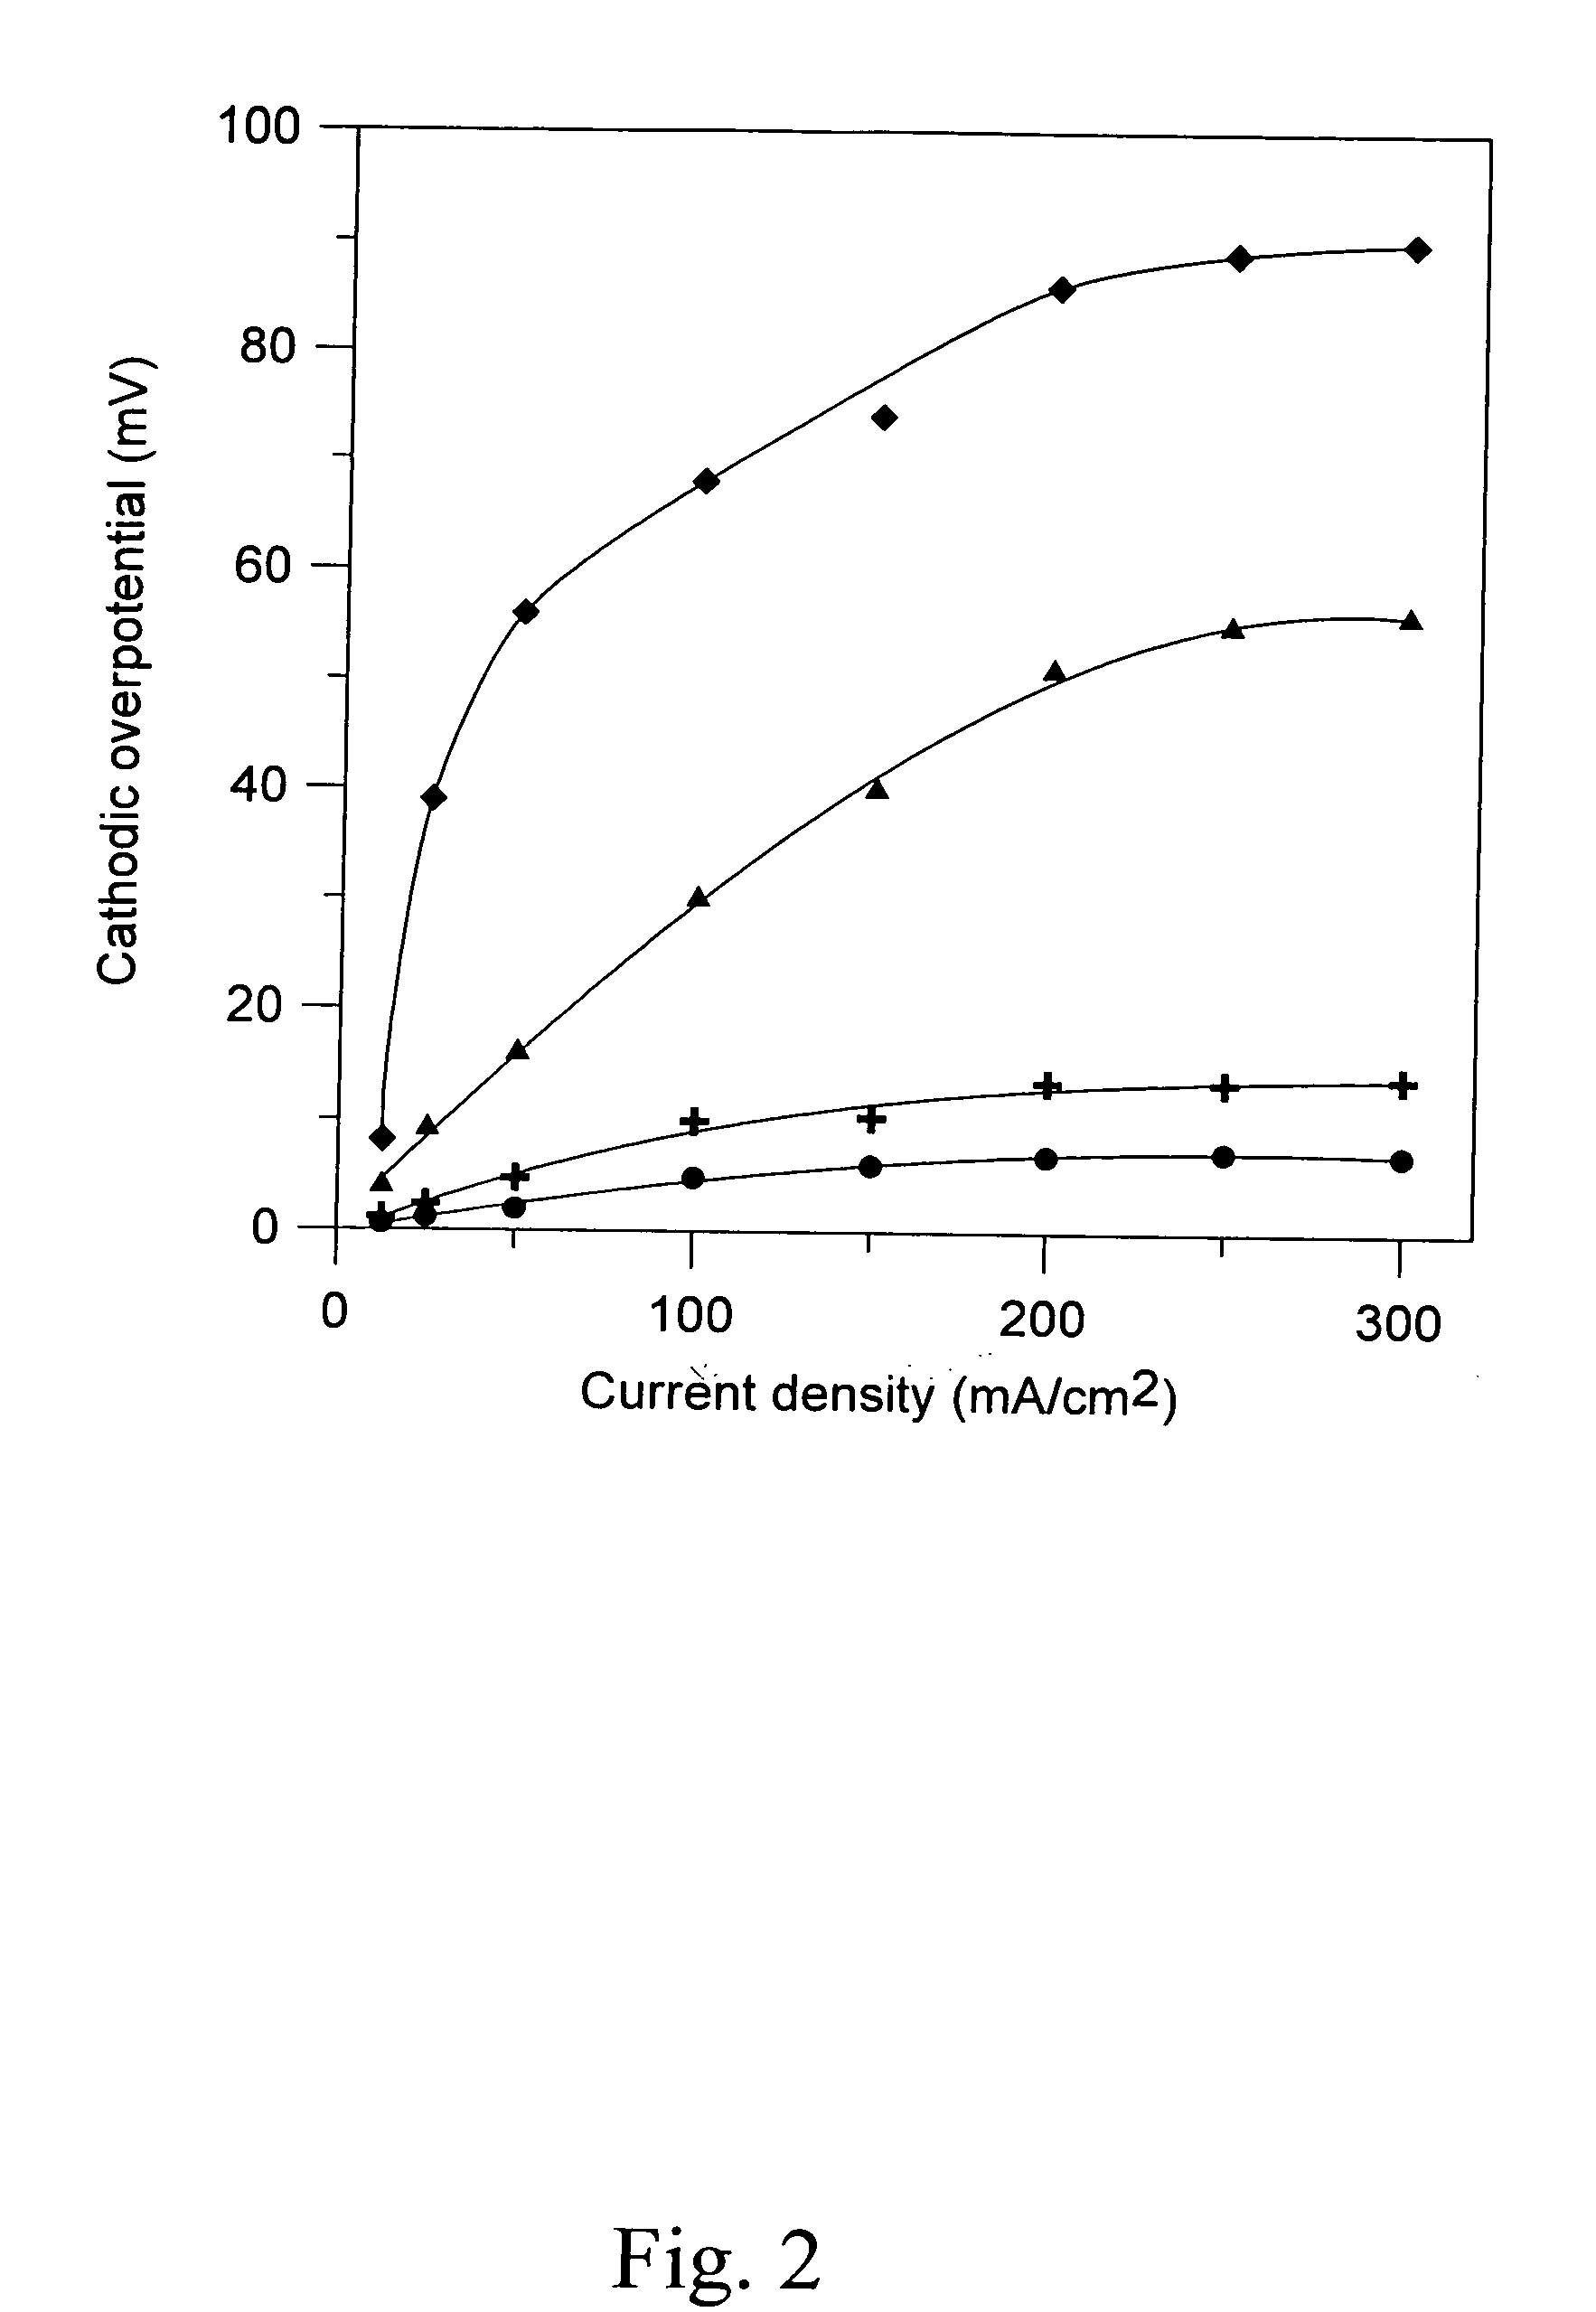 Materials for cathode in solid oxide fuel cells